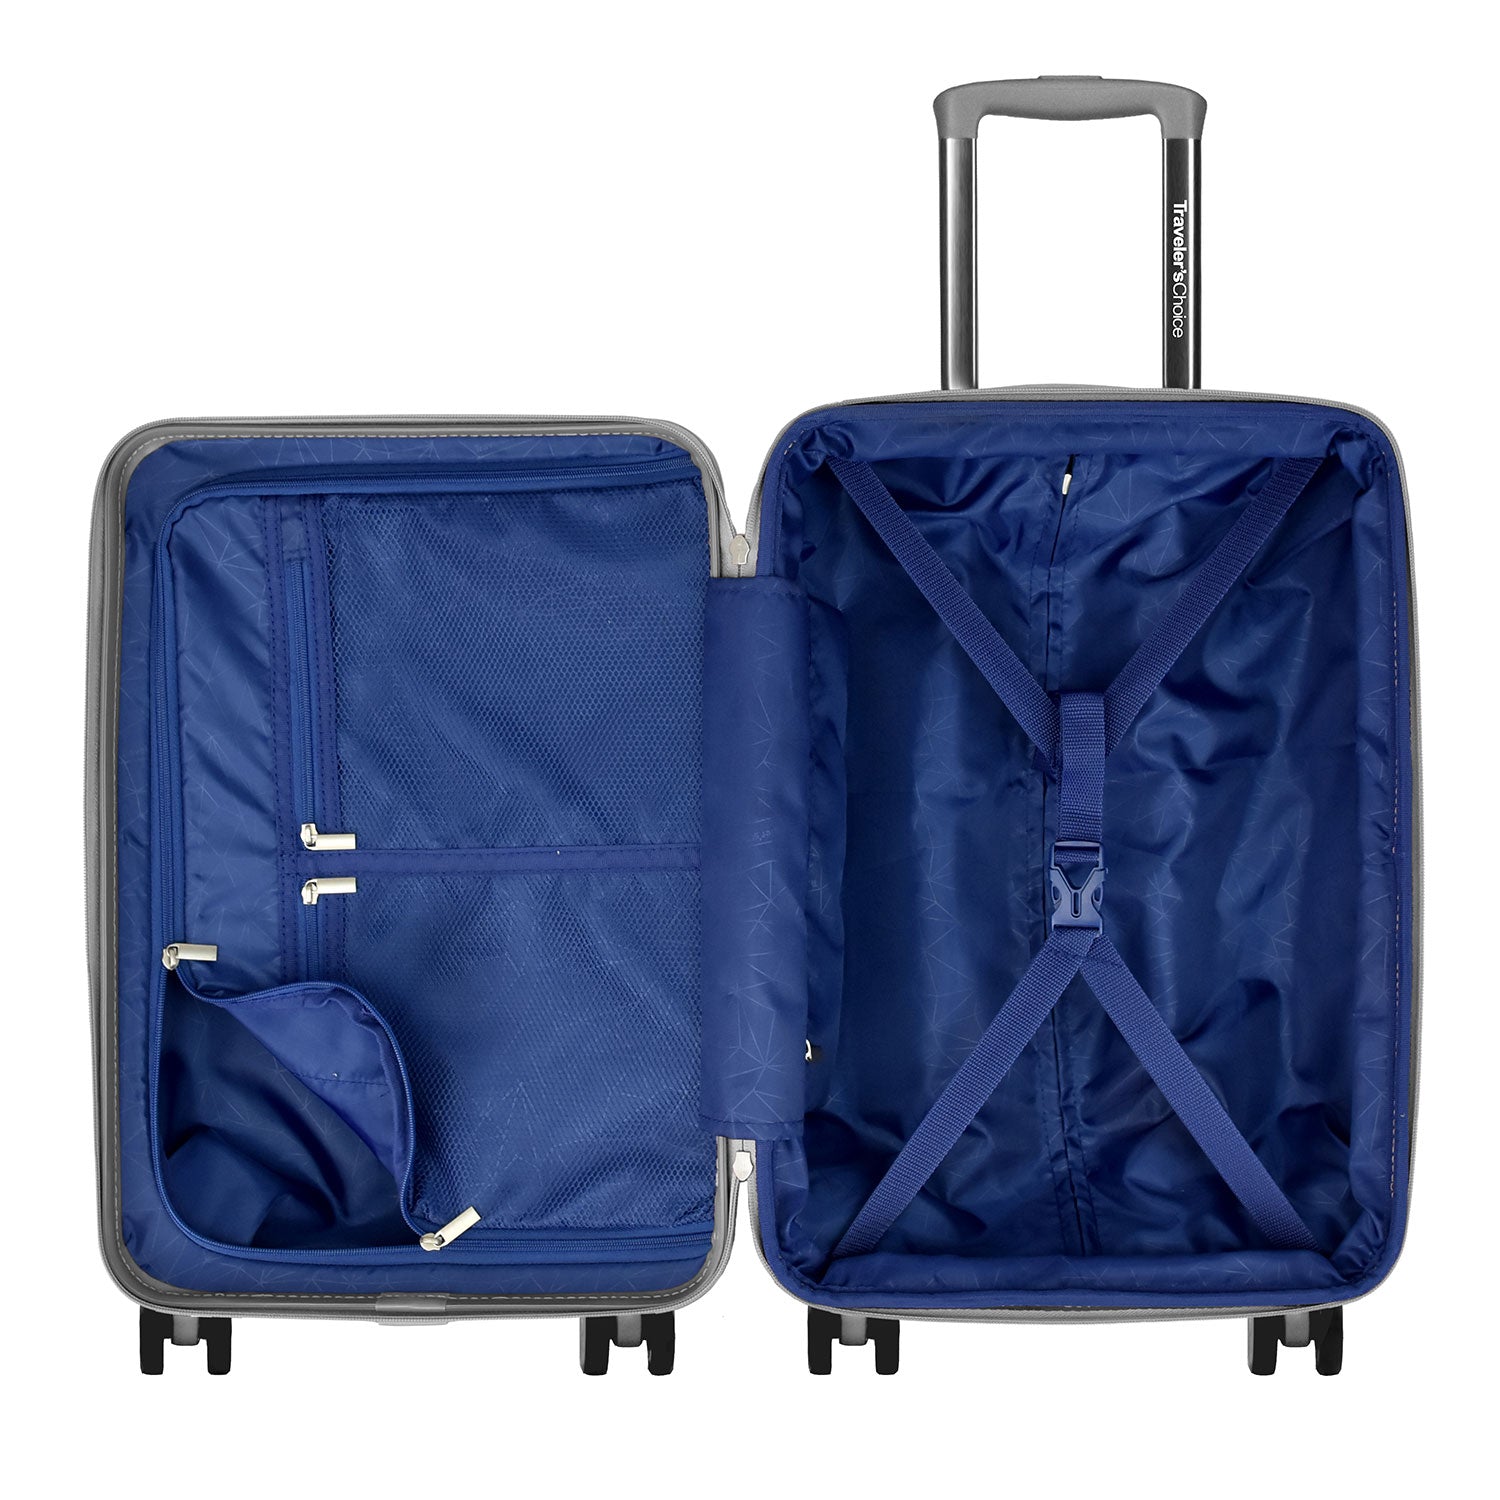 Bell Weather 3 Piece Luggage Suitcase Set with 4 Spinner Wheels | Carry On, Medium Checked, and Large Checked Suitcase